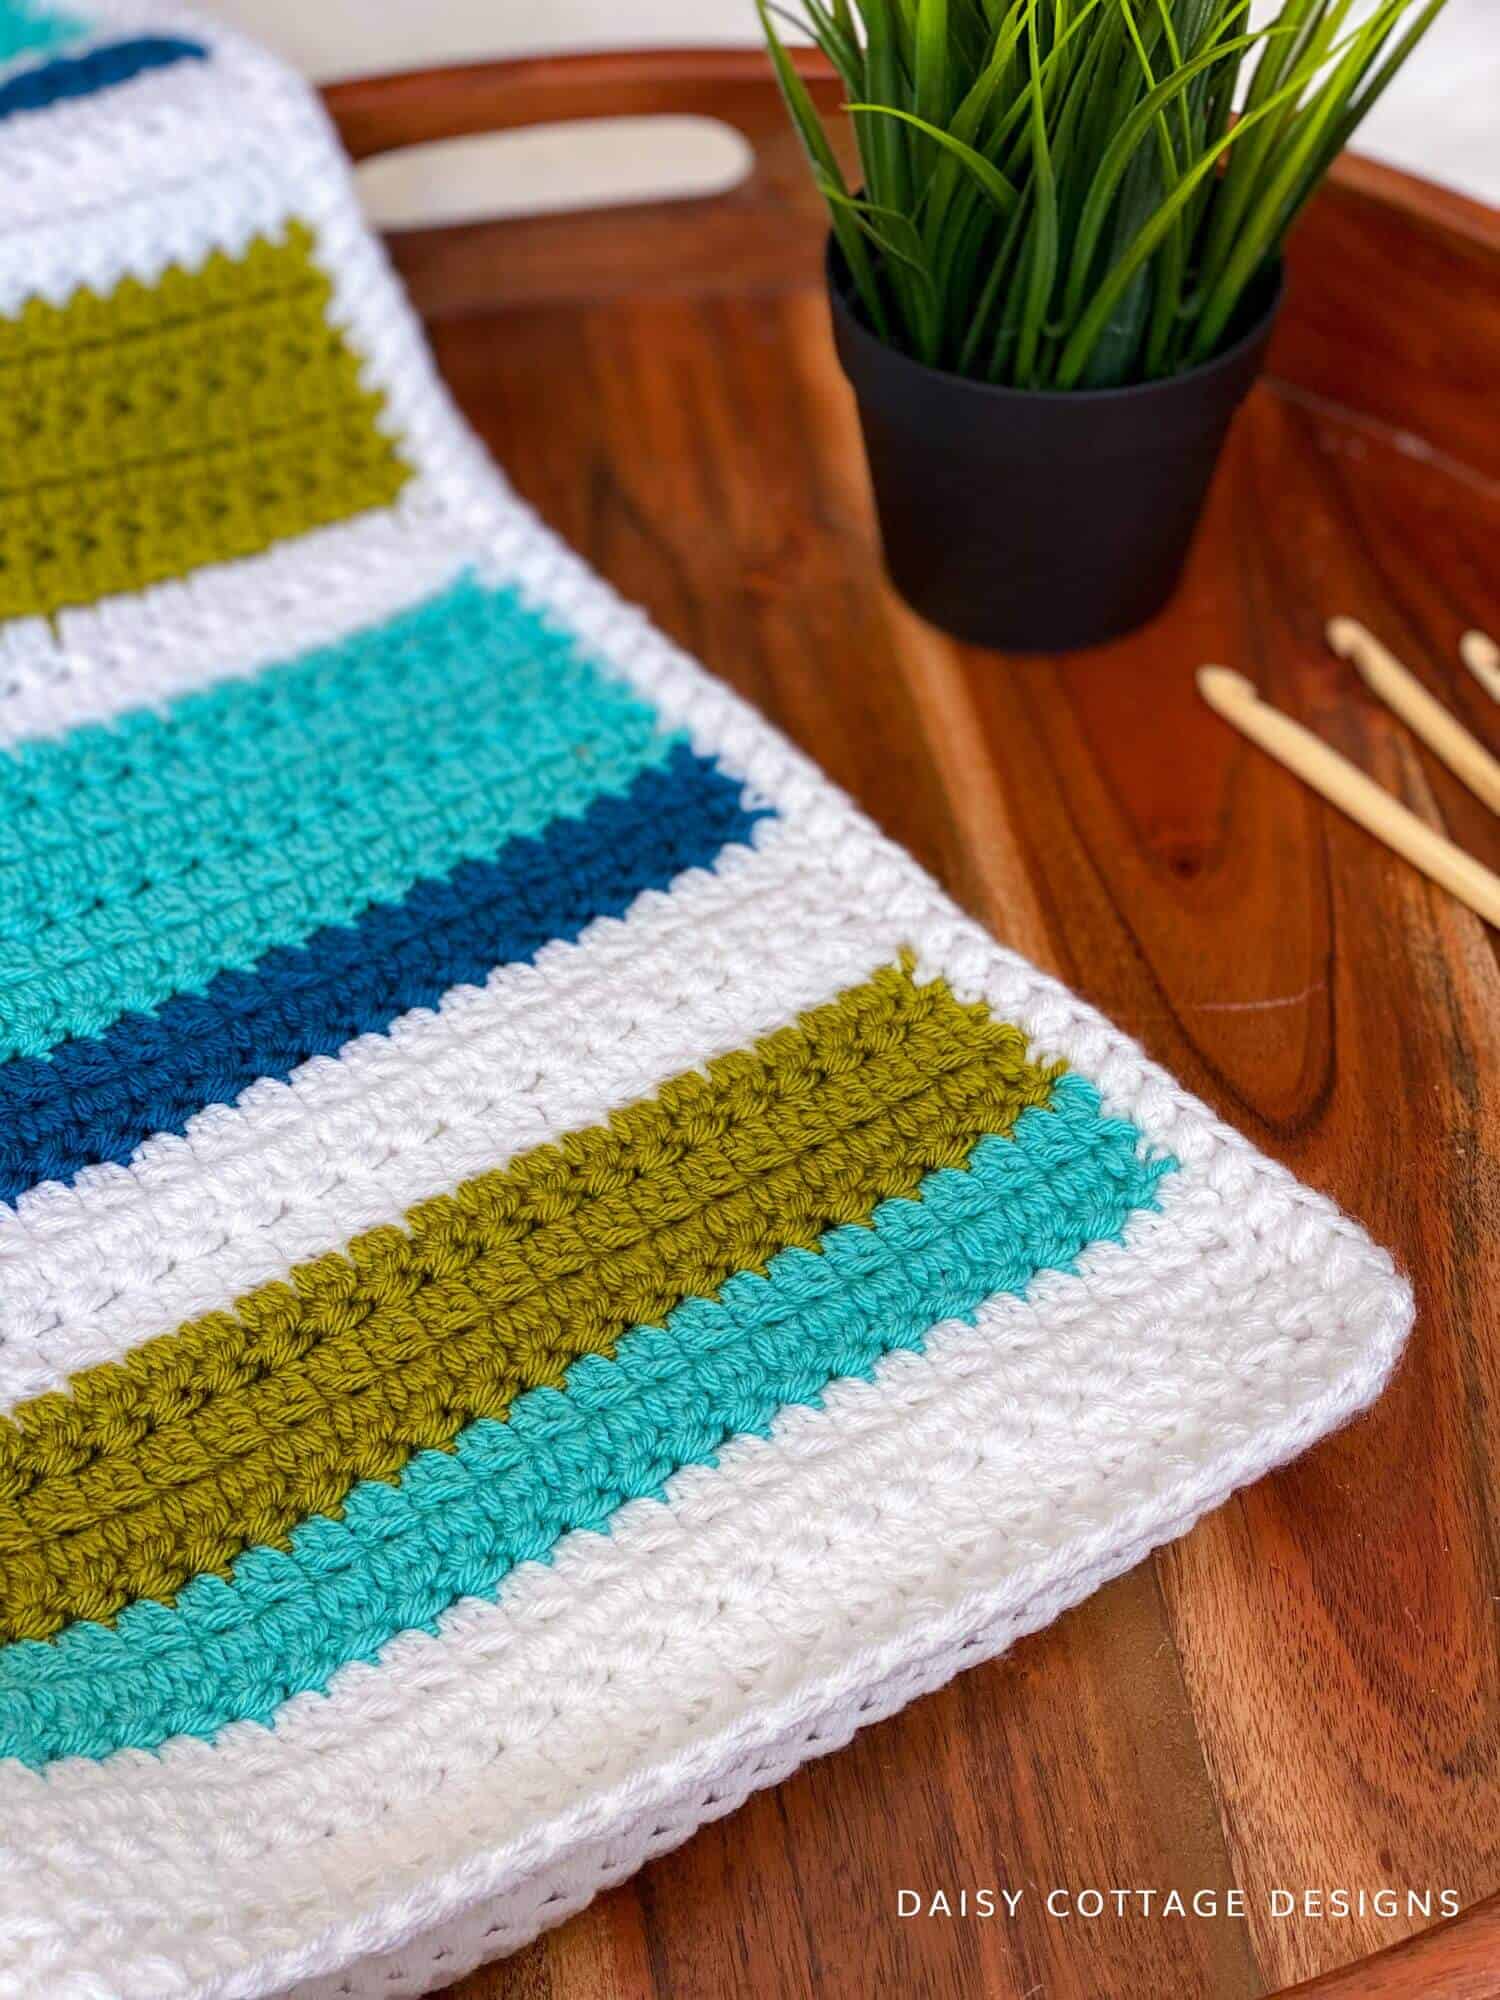 This blanket pattern features a beautiful, textured crochet stitch that's easy to make and yields stunning results. 